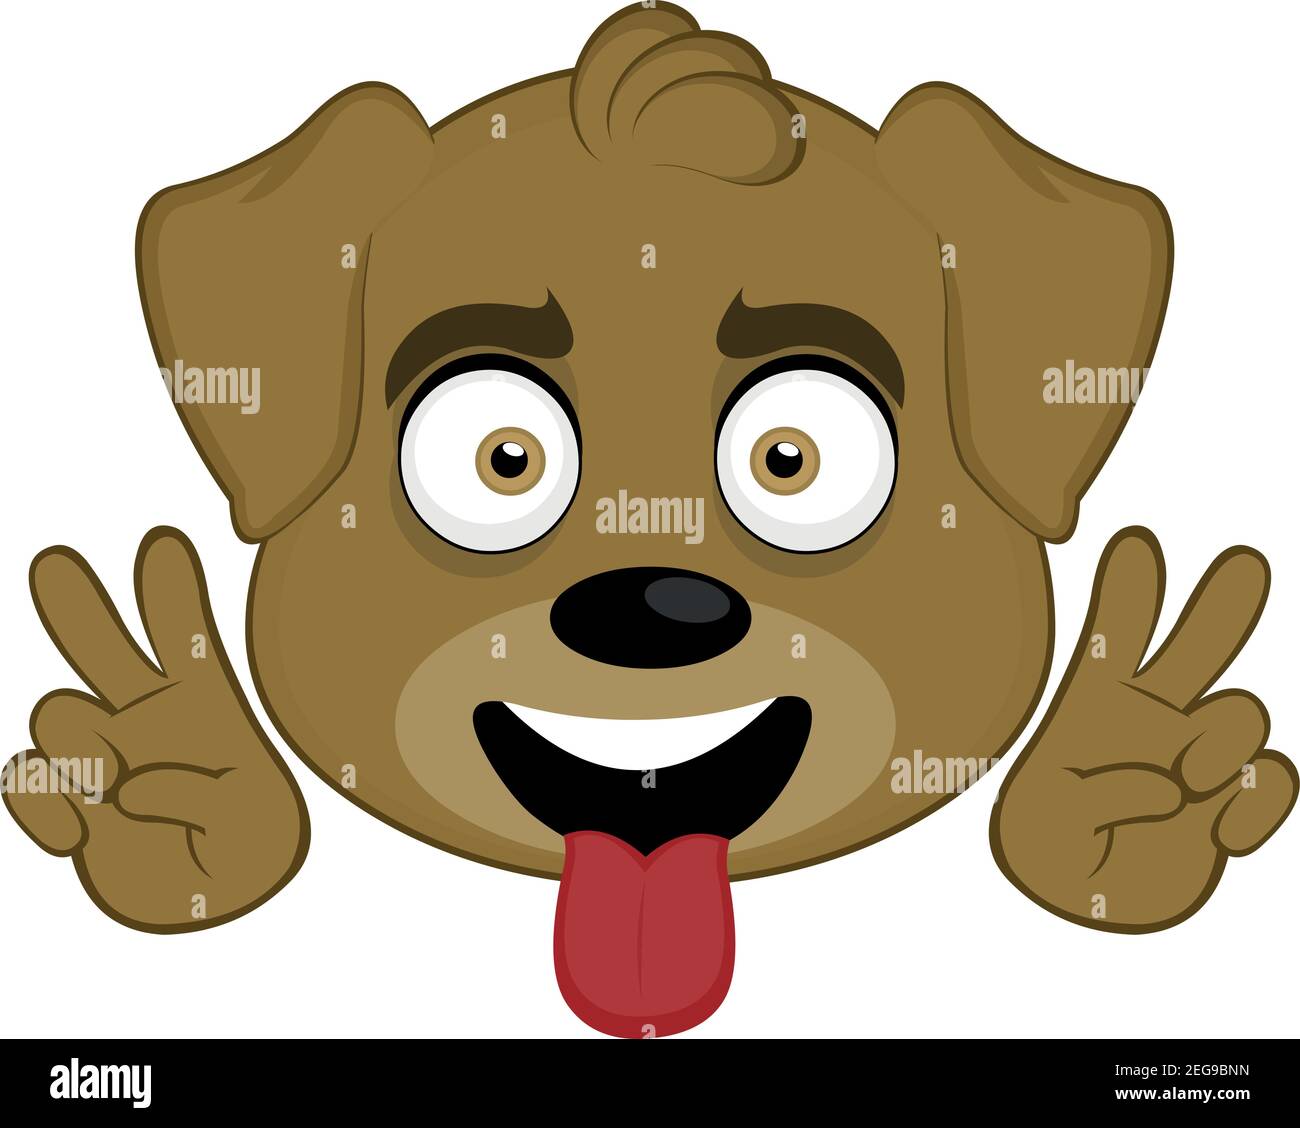 Vector emoticon  illustration cartoon of a dog's head with a happy expression, sticking out his tongue and a gesture of his hands of love and peace Stock Vector